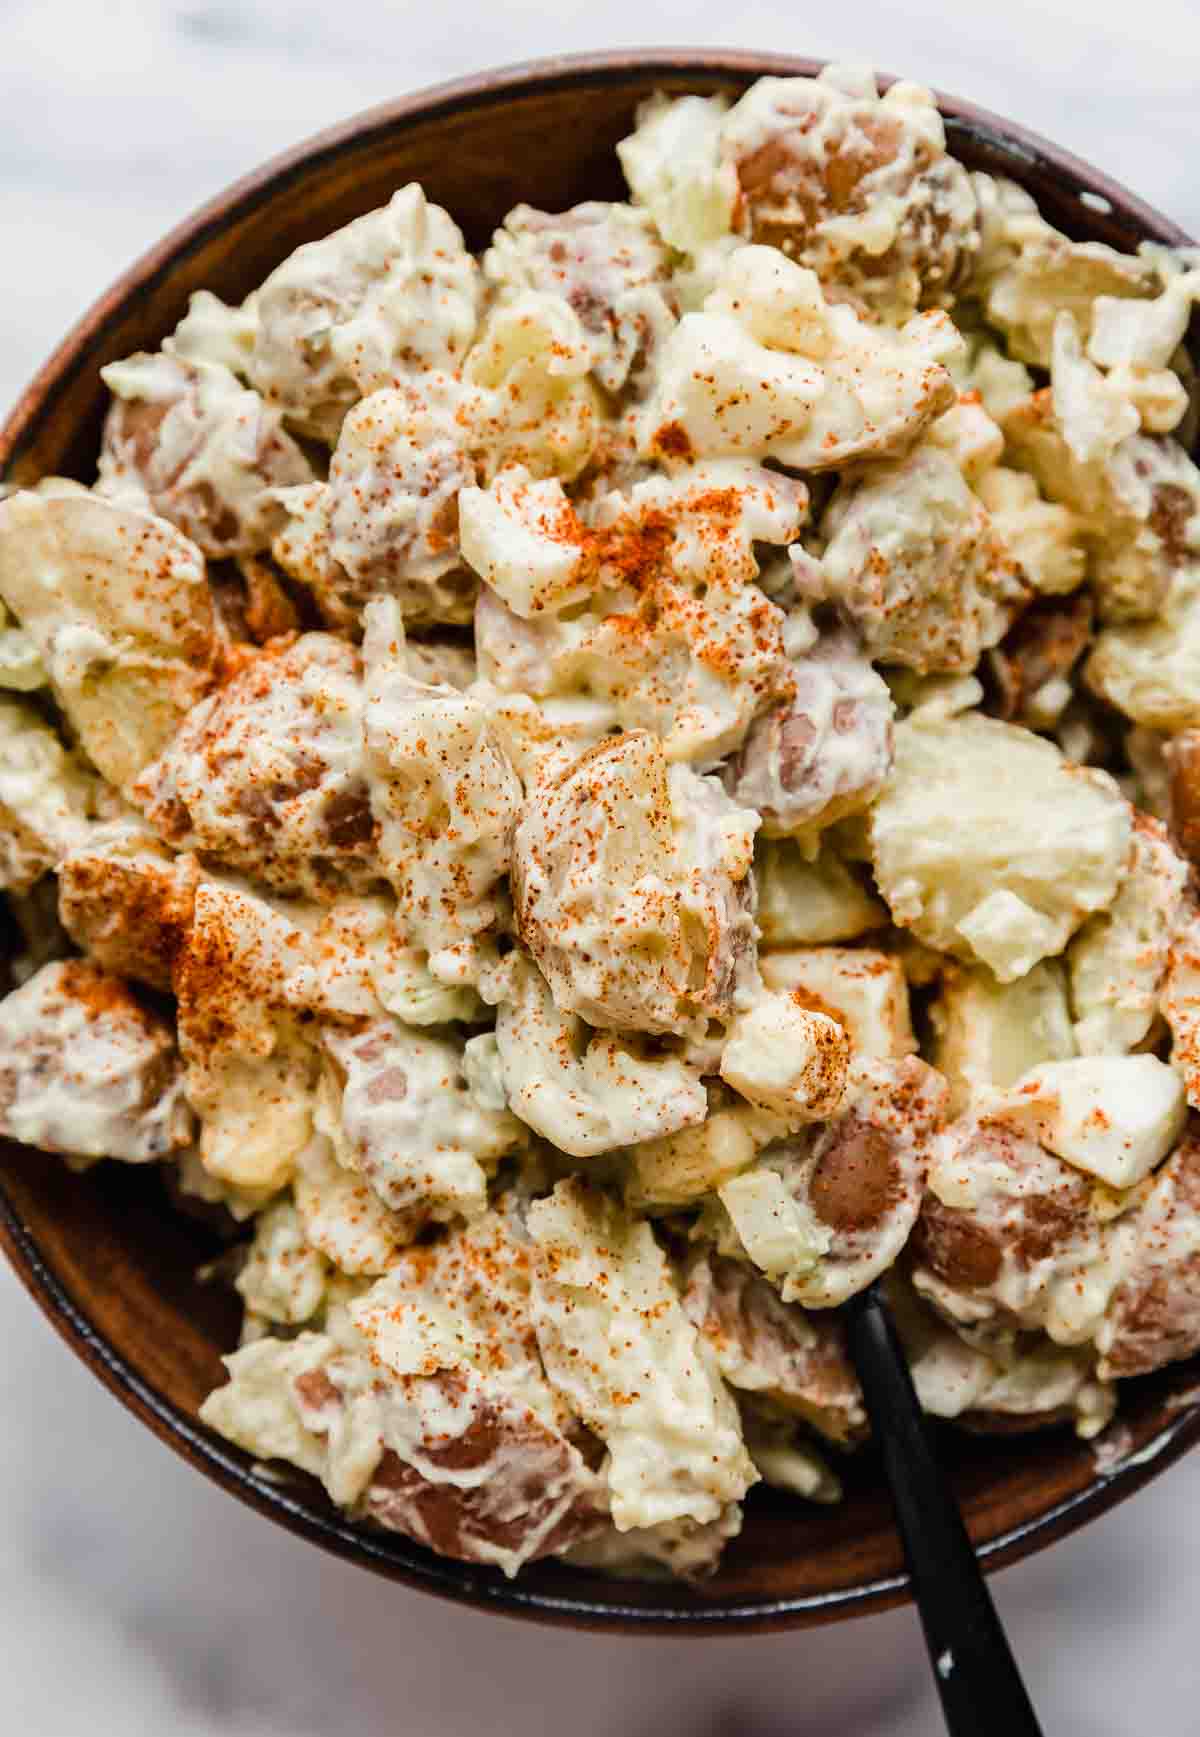 Paprika topped baby potato salad recipe in a bowl on a white background.